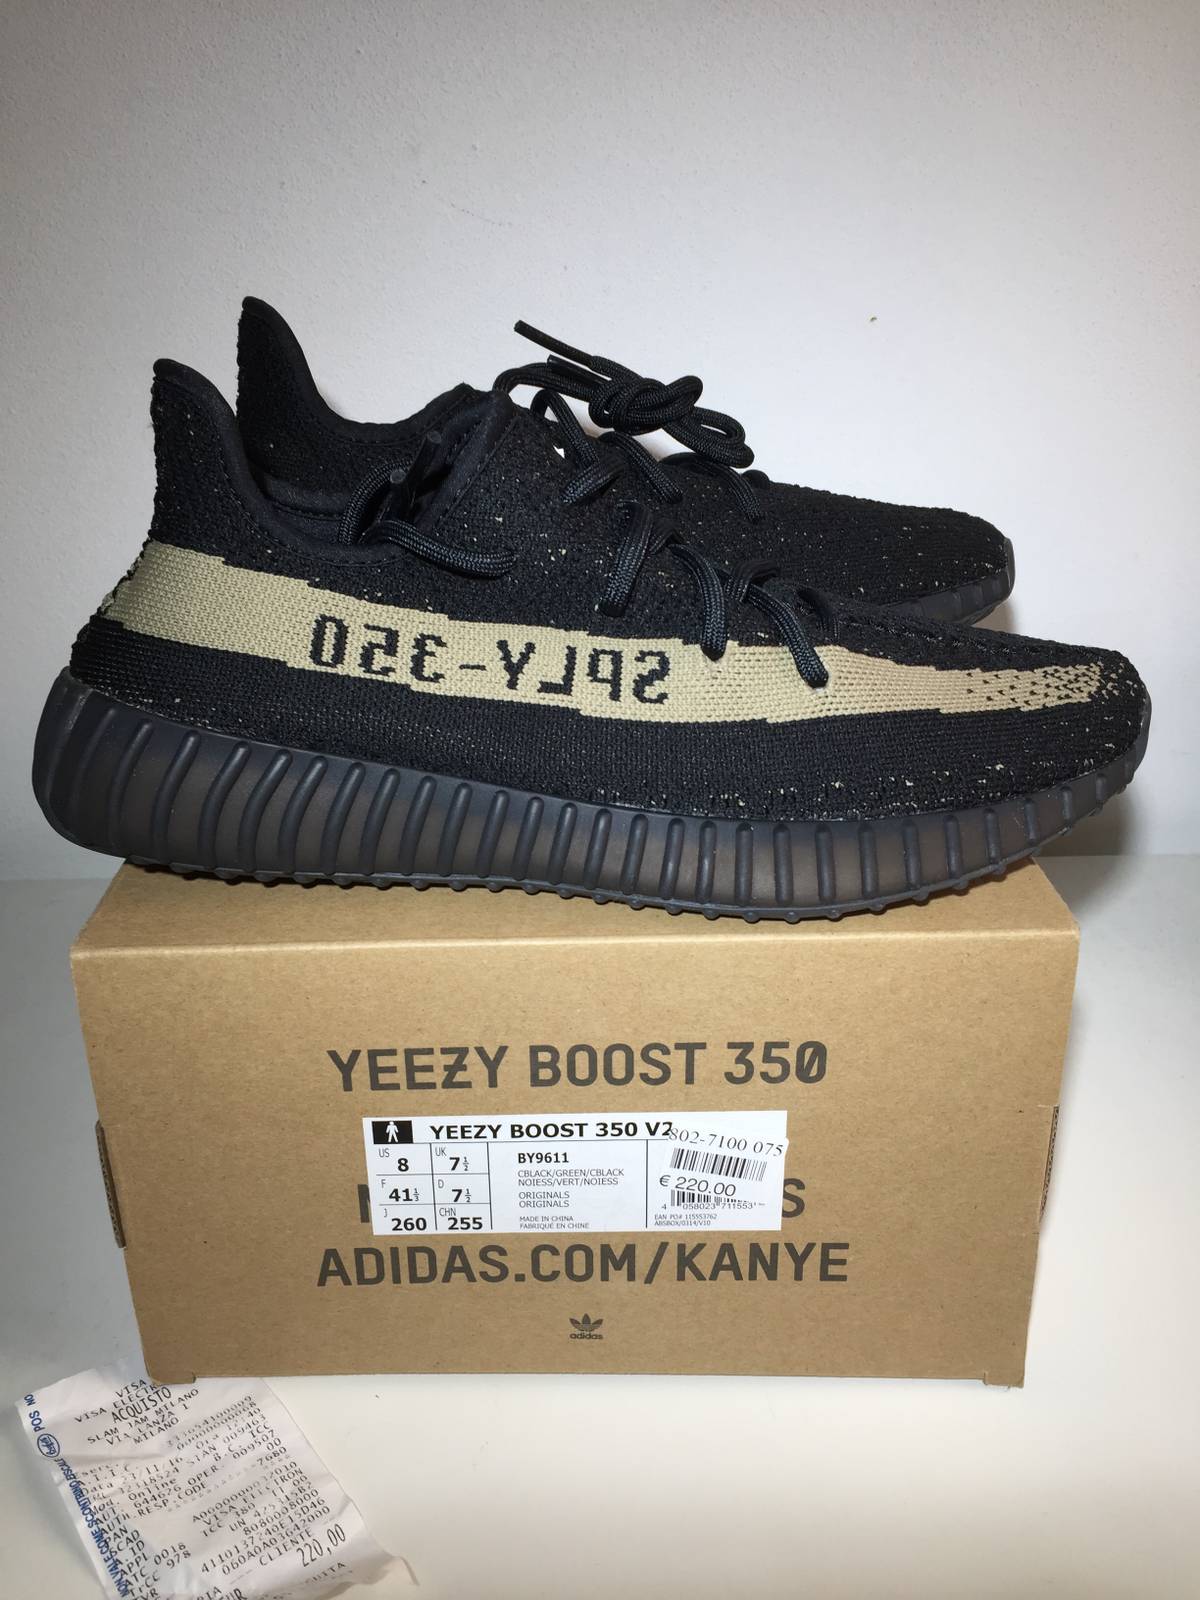 Adidas Yeezy Boost 350 V 2 Core Black / Core White BY 1604 Sz 9.5 In